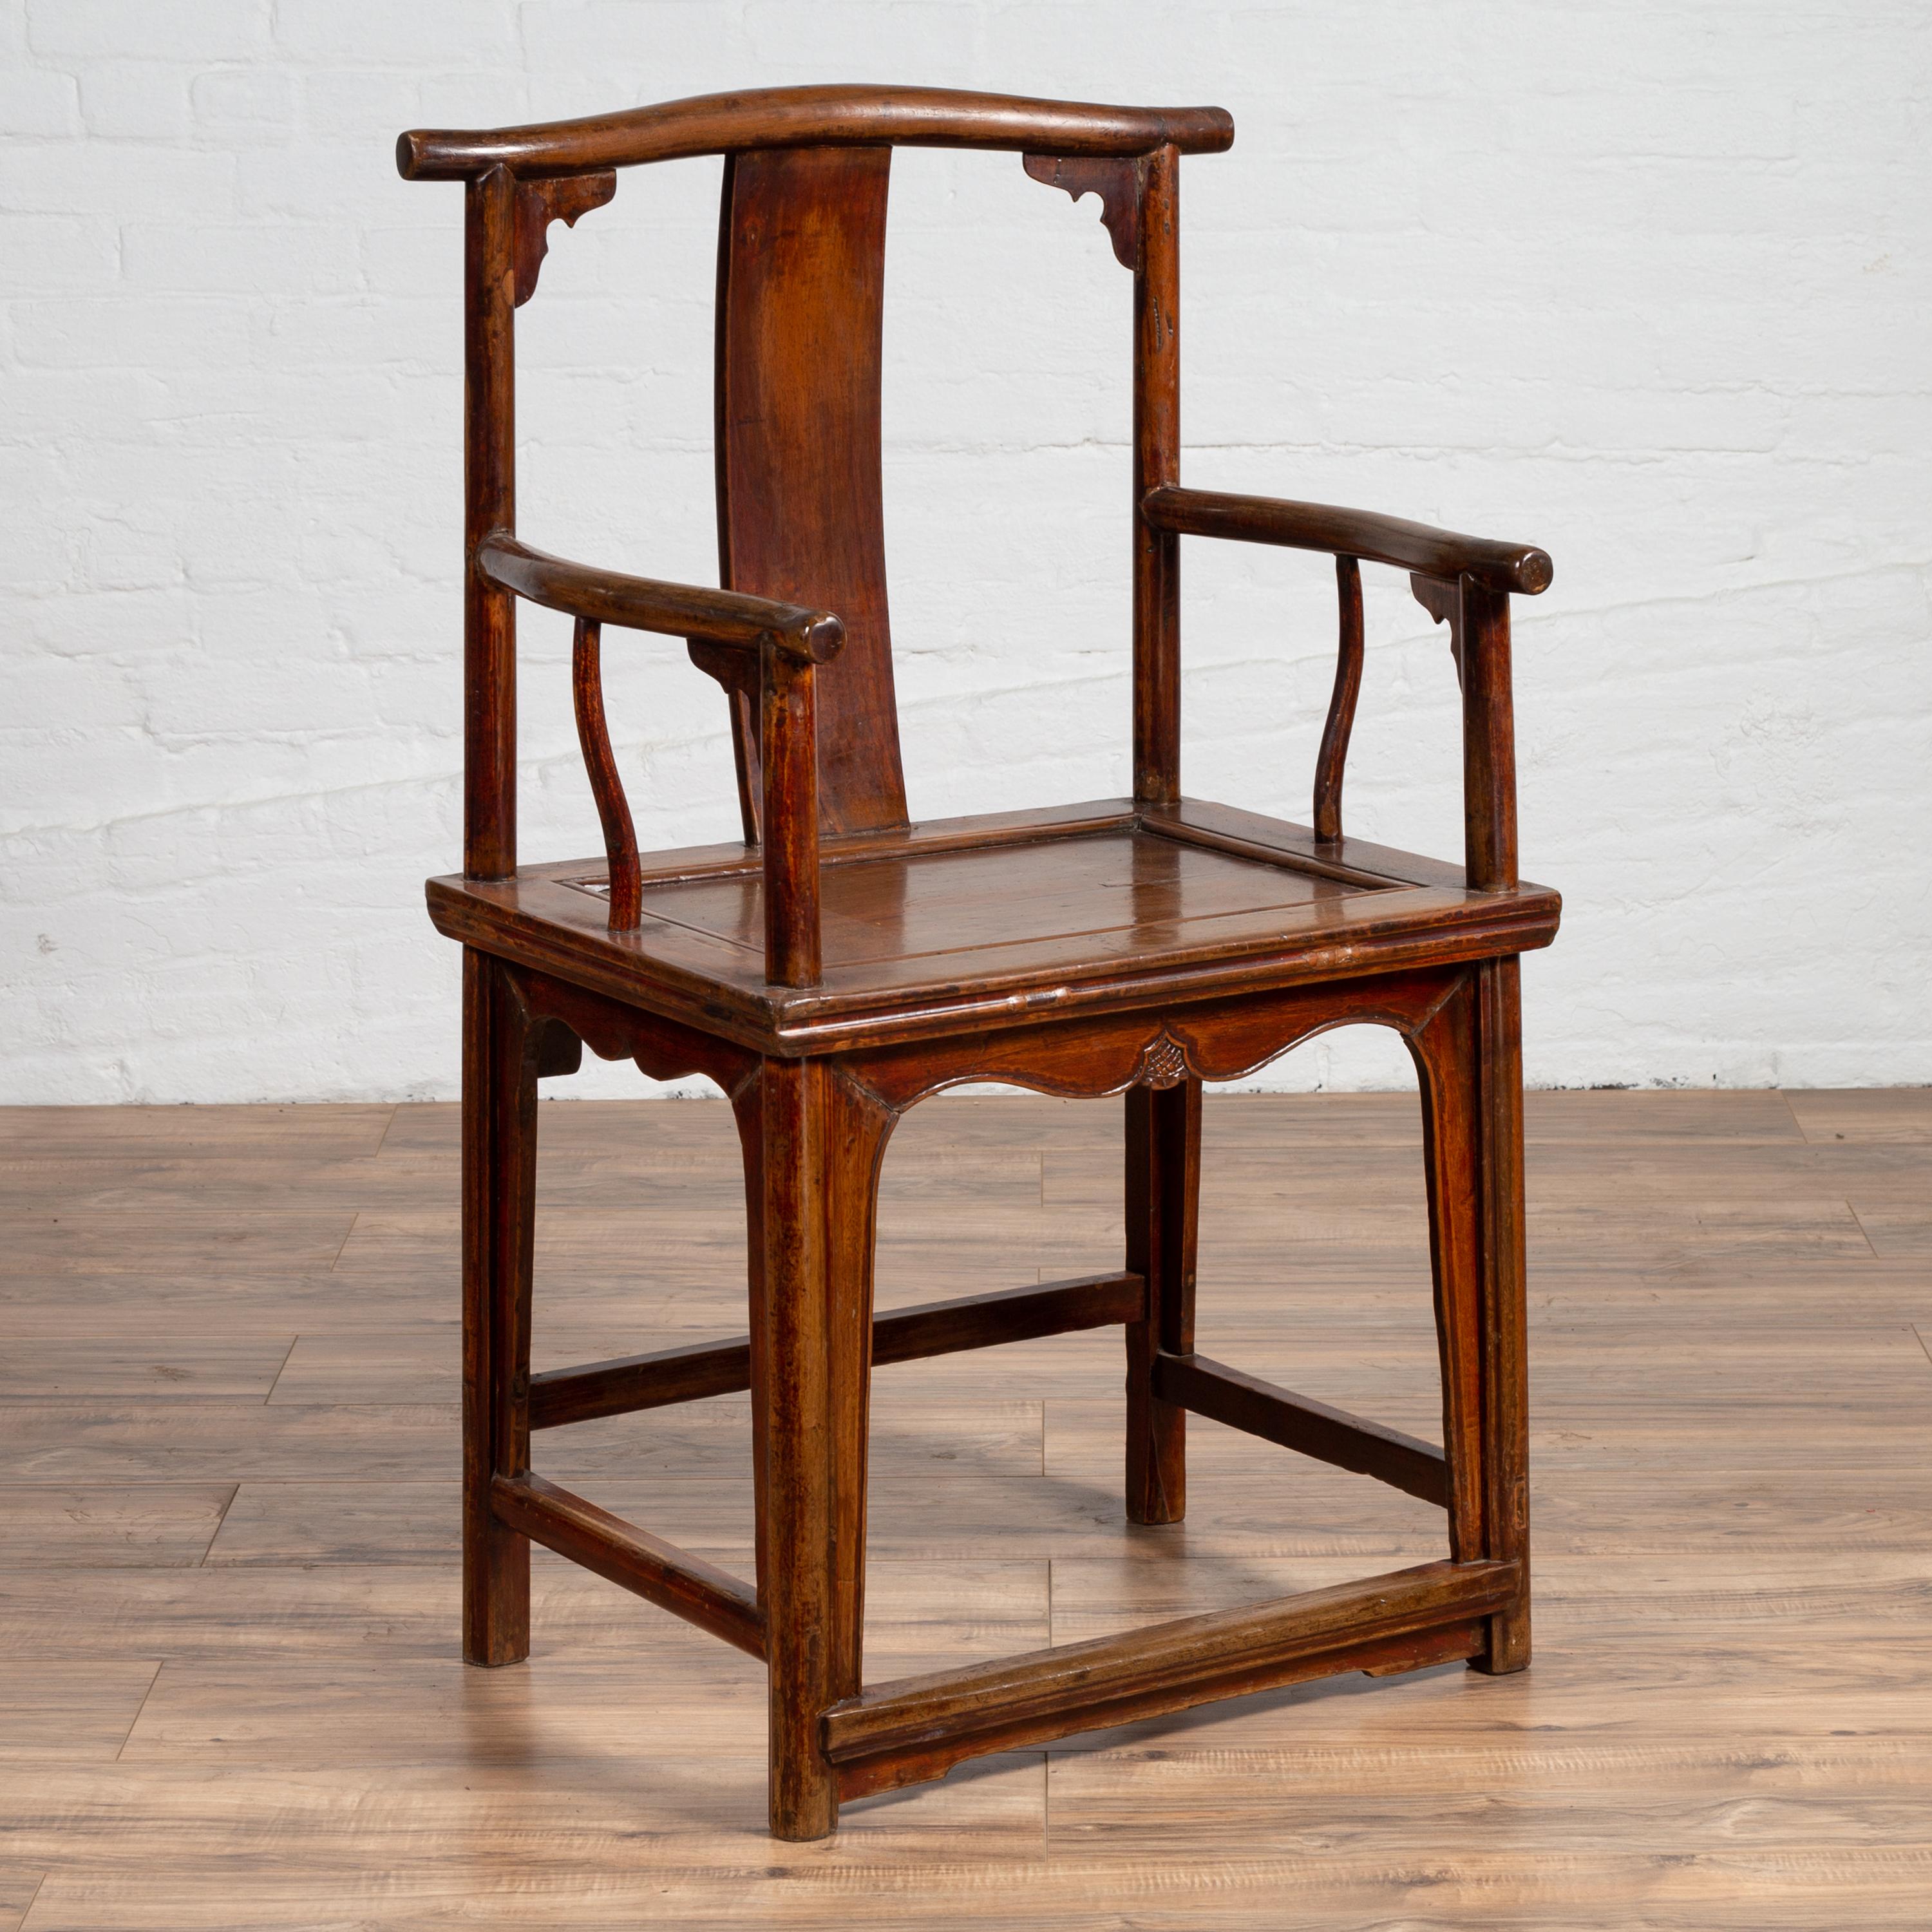 A Chinese Qing dynasty period official's lamp-hanger chair from the late 19th century with curving arms, carved spandrels and arched apron. Born in China during the last quarter of the 19th century, this Qing dynasty wooden chair features a